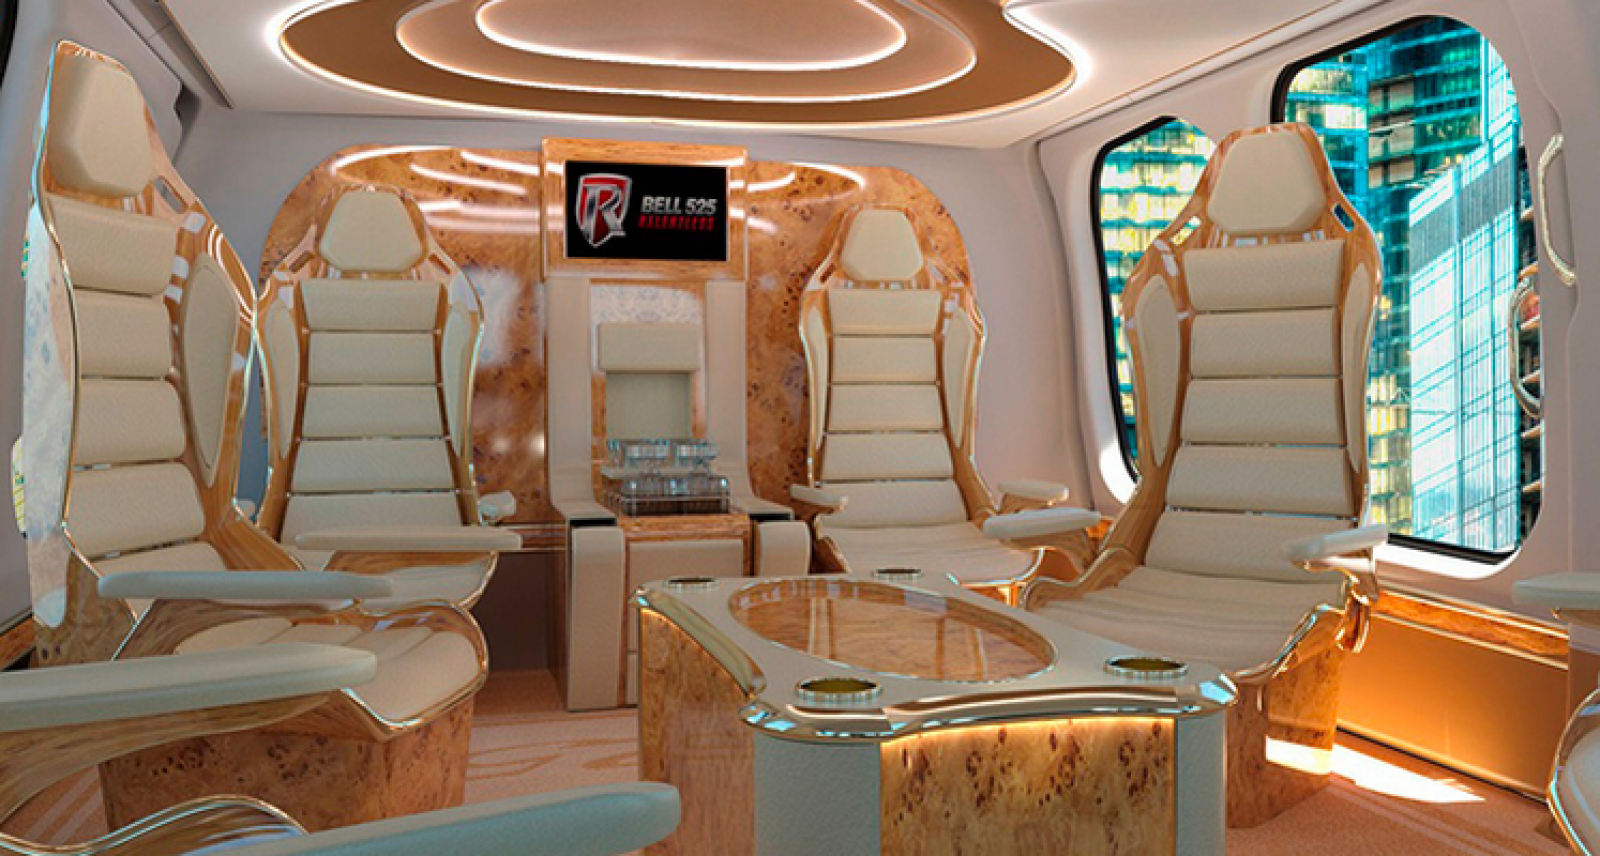 A lavish helicopter interior, Mayweather’s stupid-expensive mouthguard